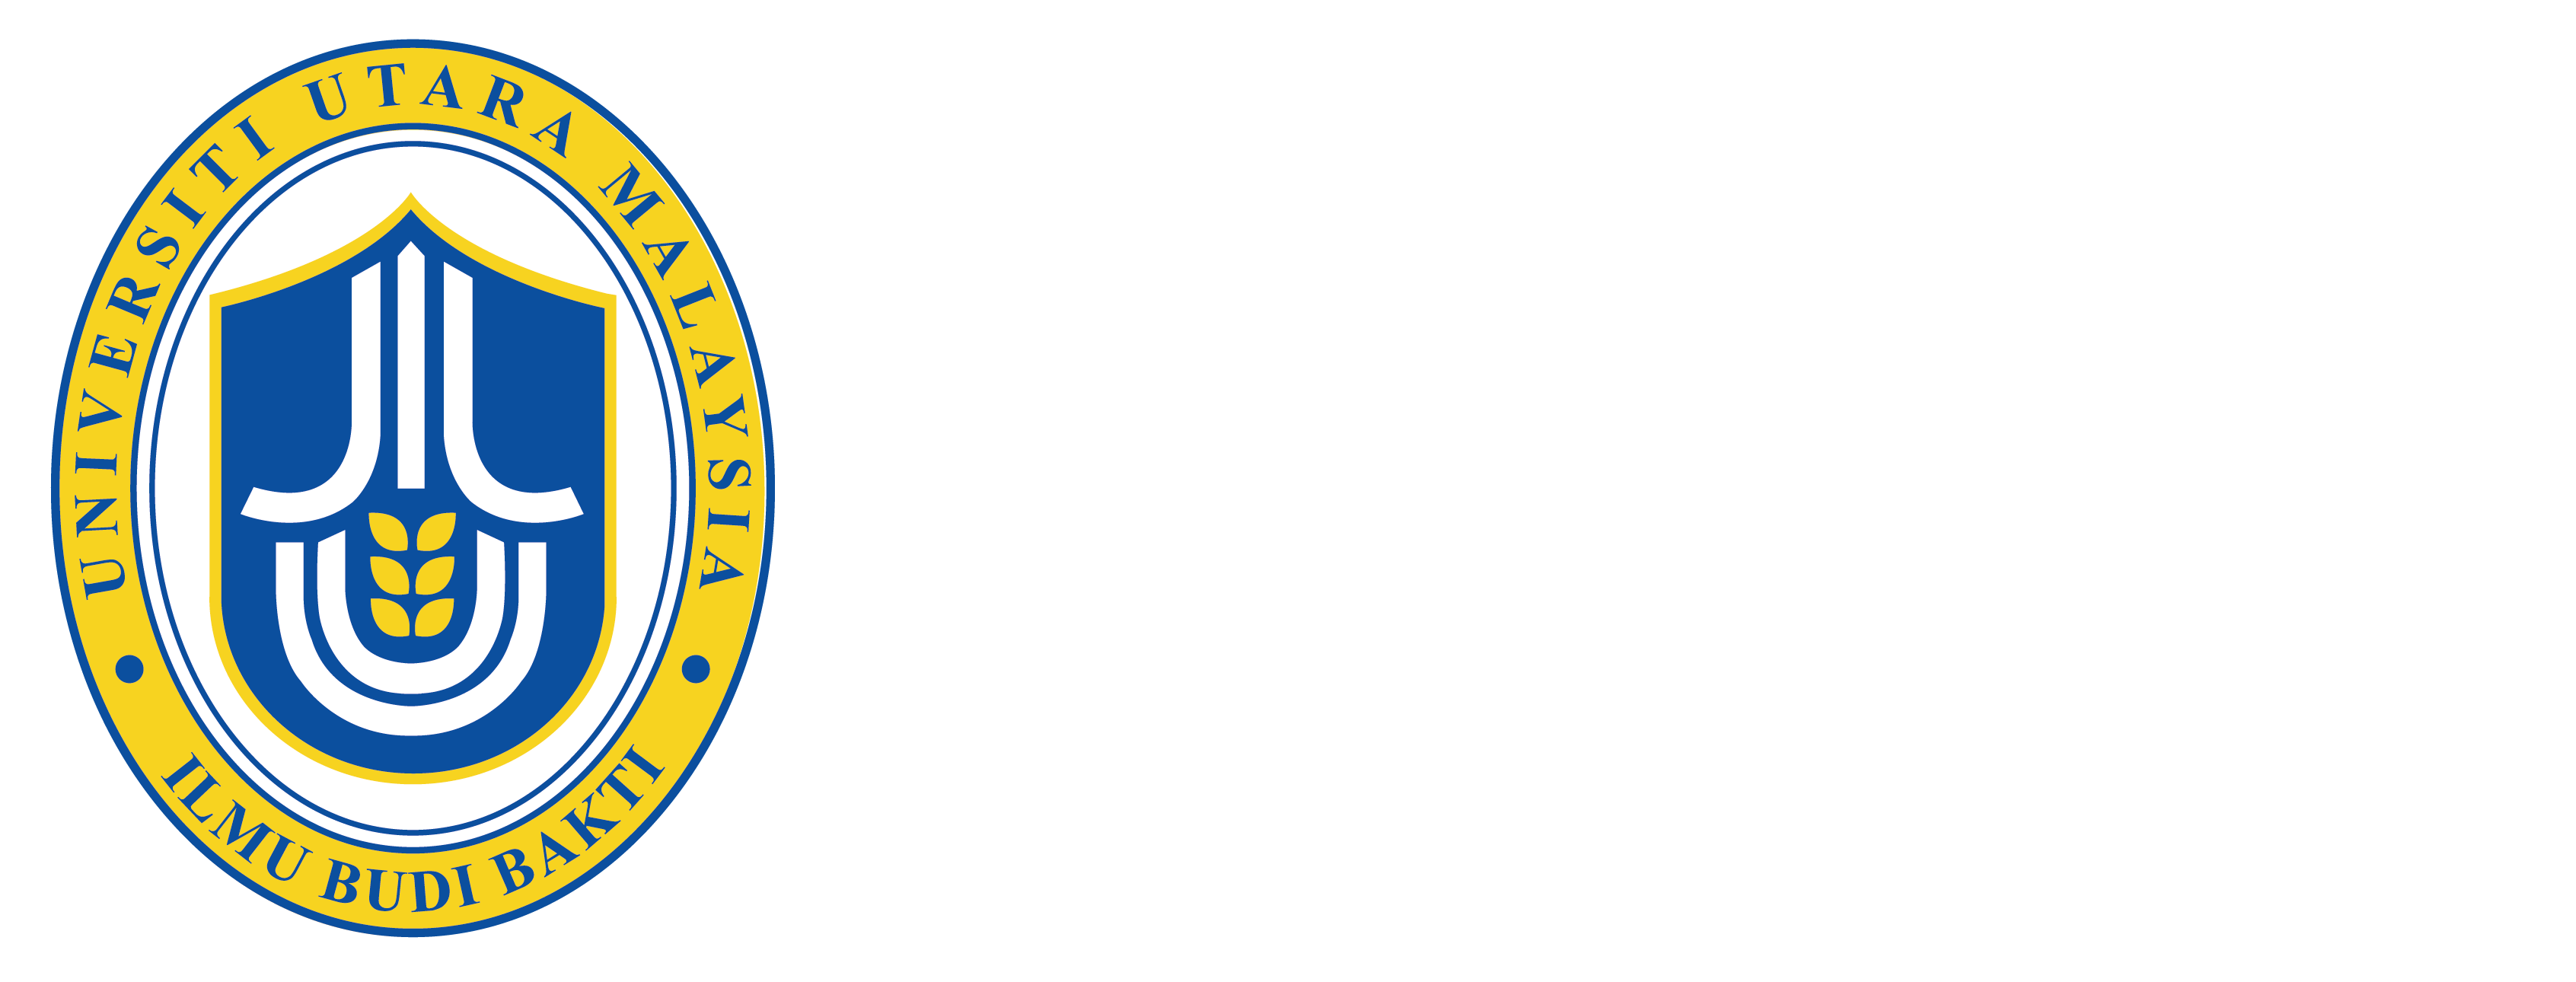 School Of Applied Psychology, Social Work & Policy, UUM